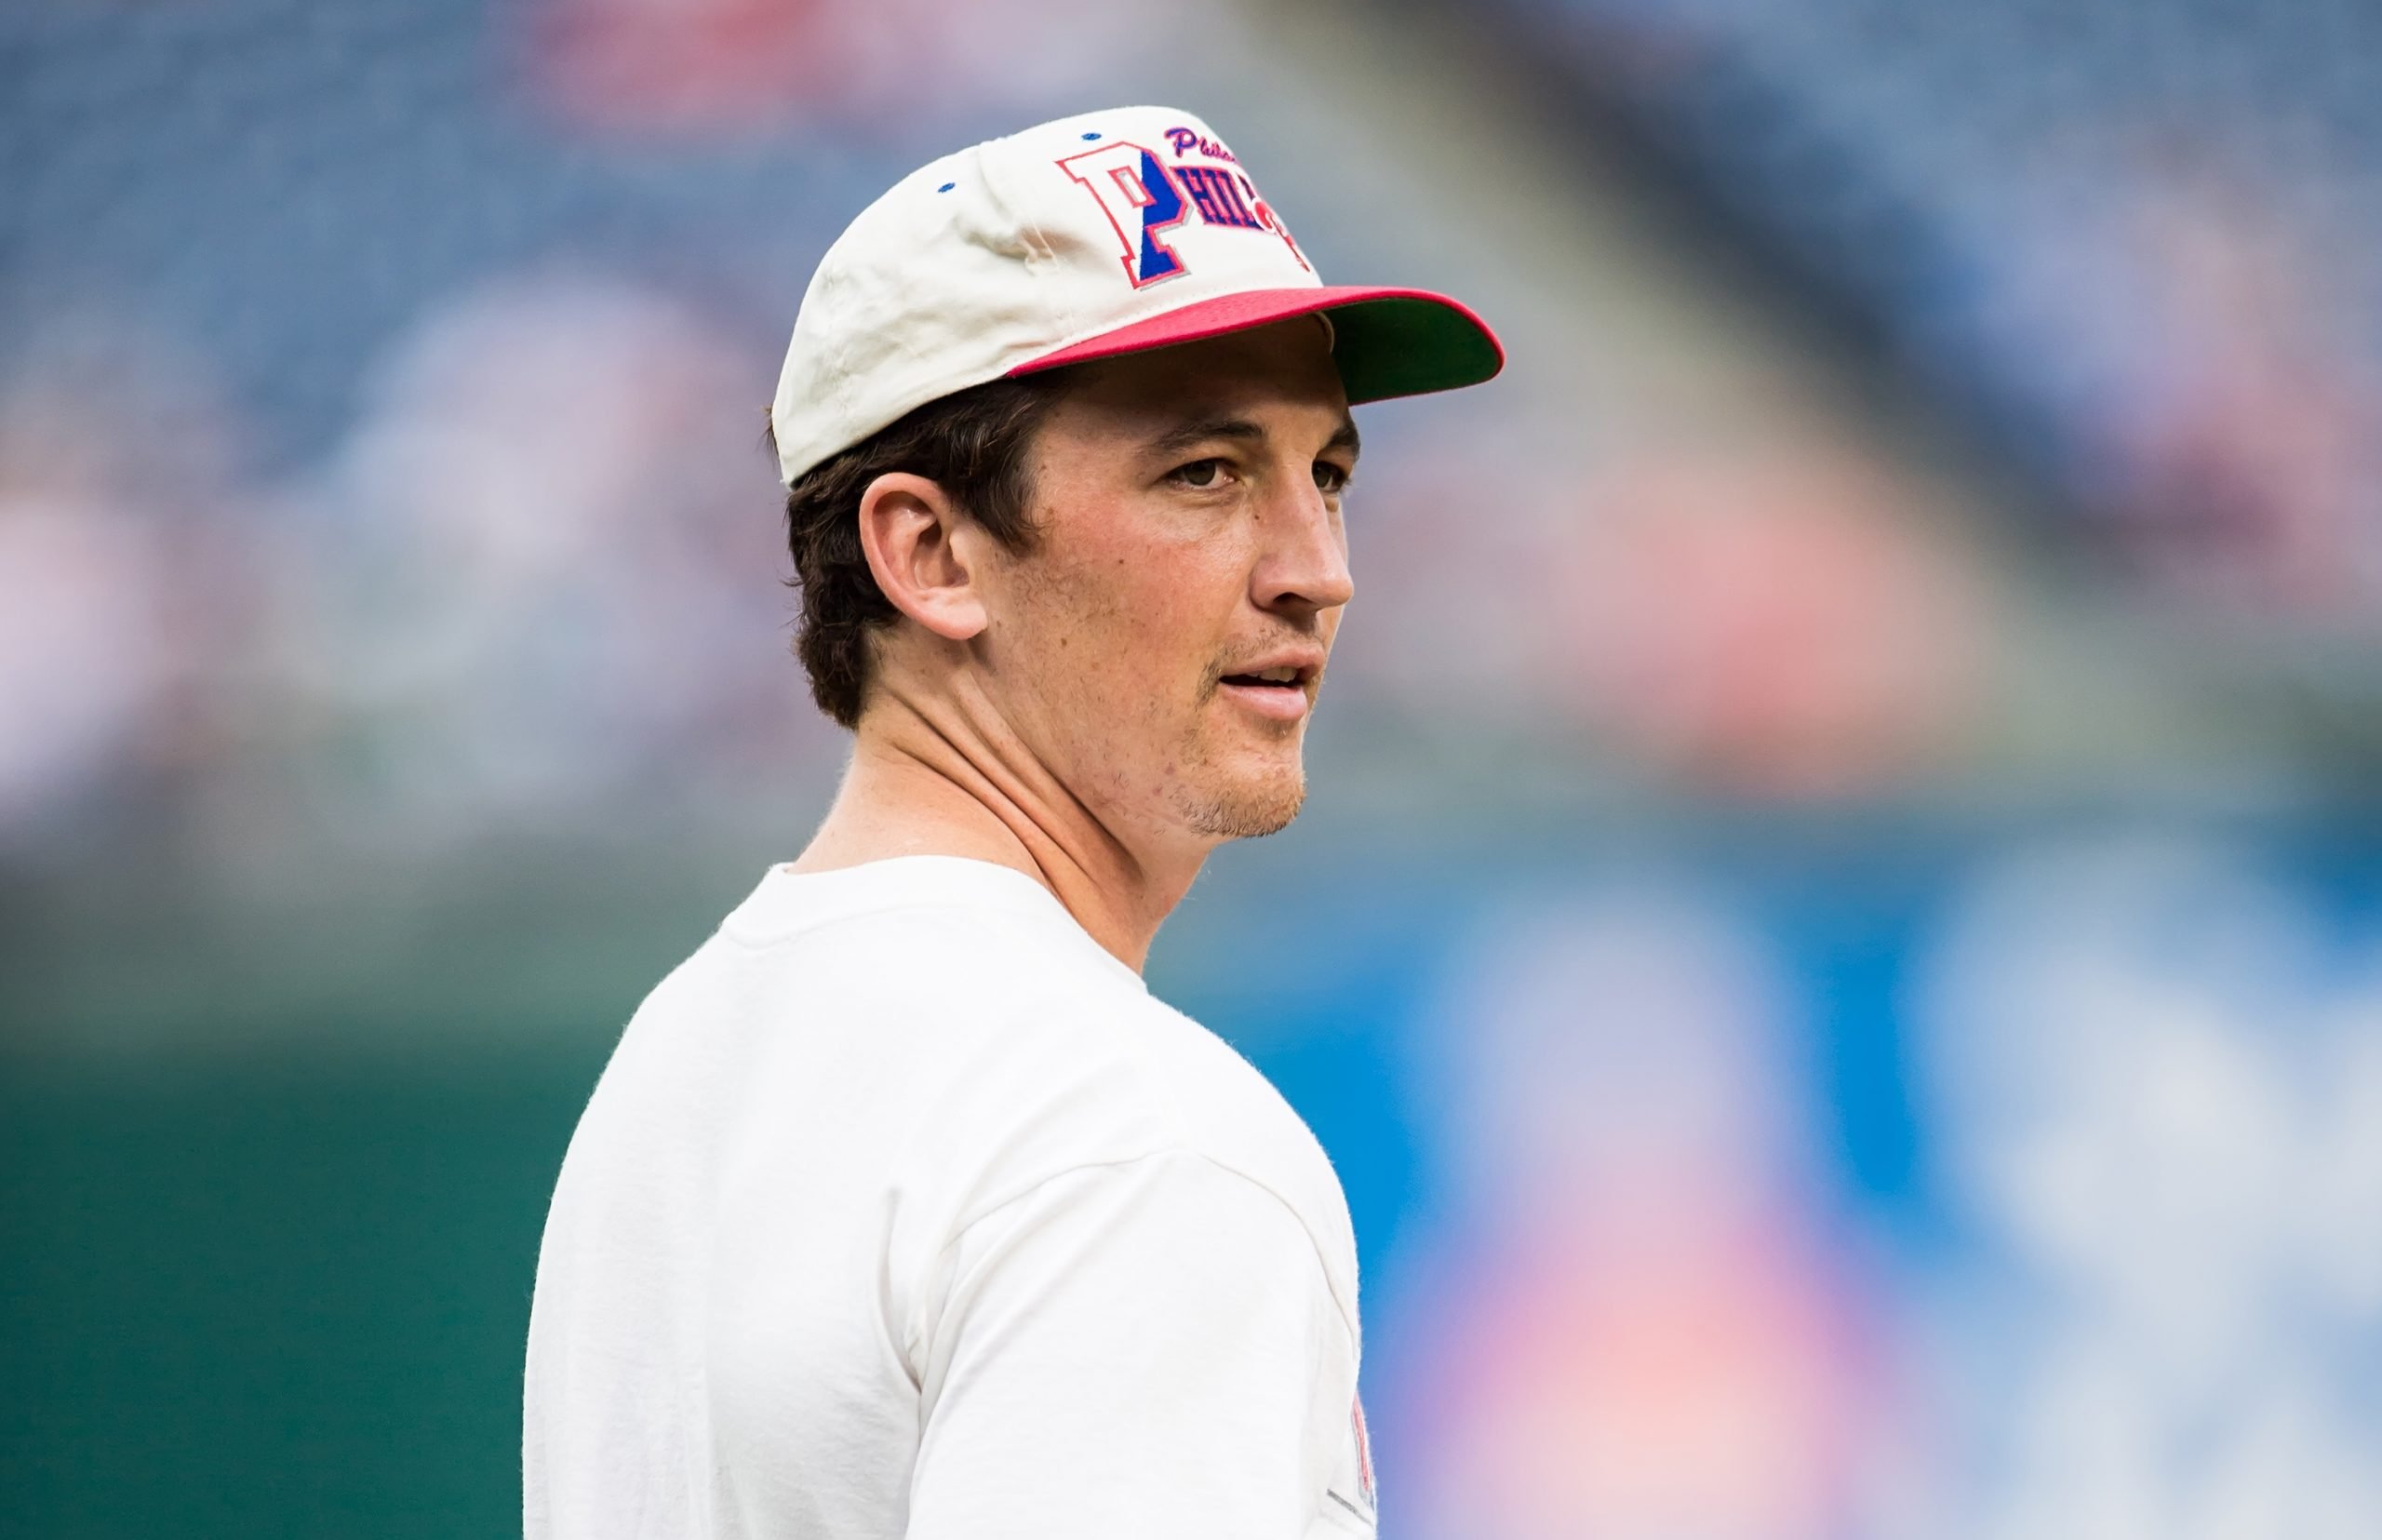 Actor Miles Teller throws the opening pitch at the San Francisco Giants vs. Philadelphia Phillies game